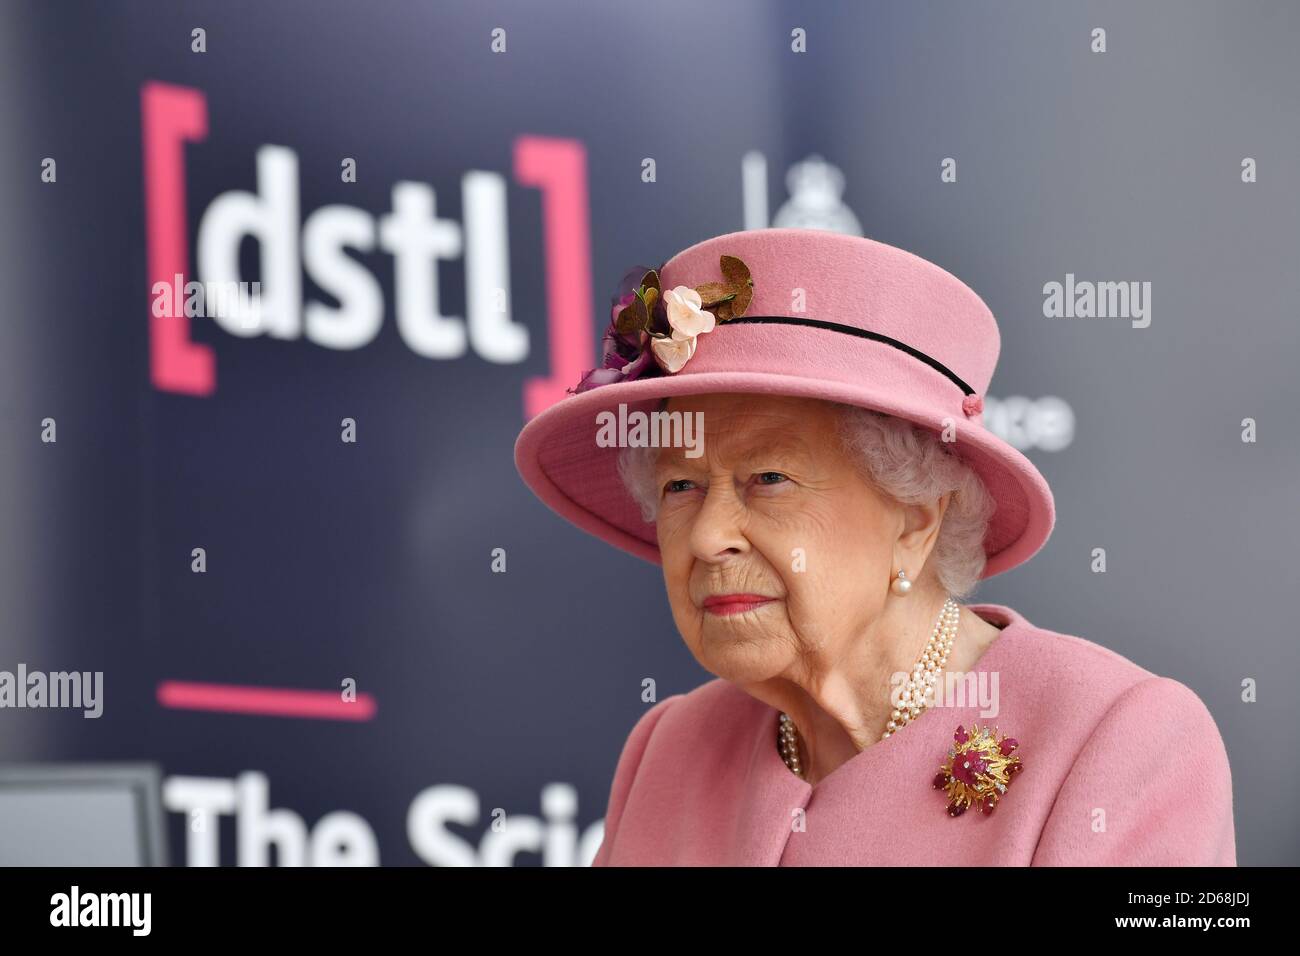 Queen Elizabeth II during a visit to the Energetics Analysis Centre at the Defence Science and Technology Laboratory (DSTL) at Porton Down, Wiltshire, to view a display of weaponry and tactics used in counter intelligence, and meet staff who were involved in the Salisbury Novichok incident. Stock Photo